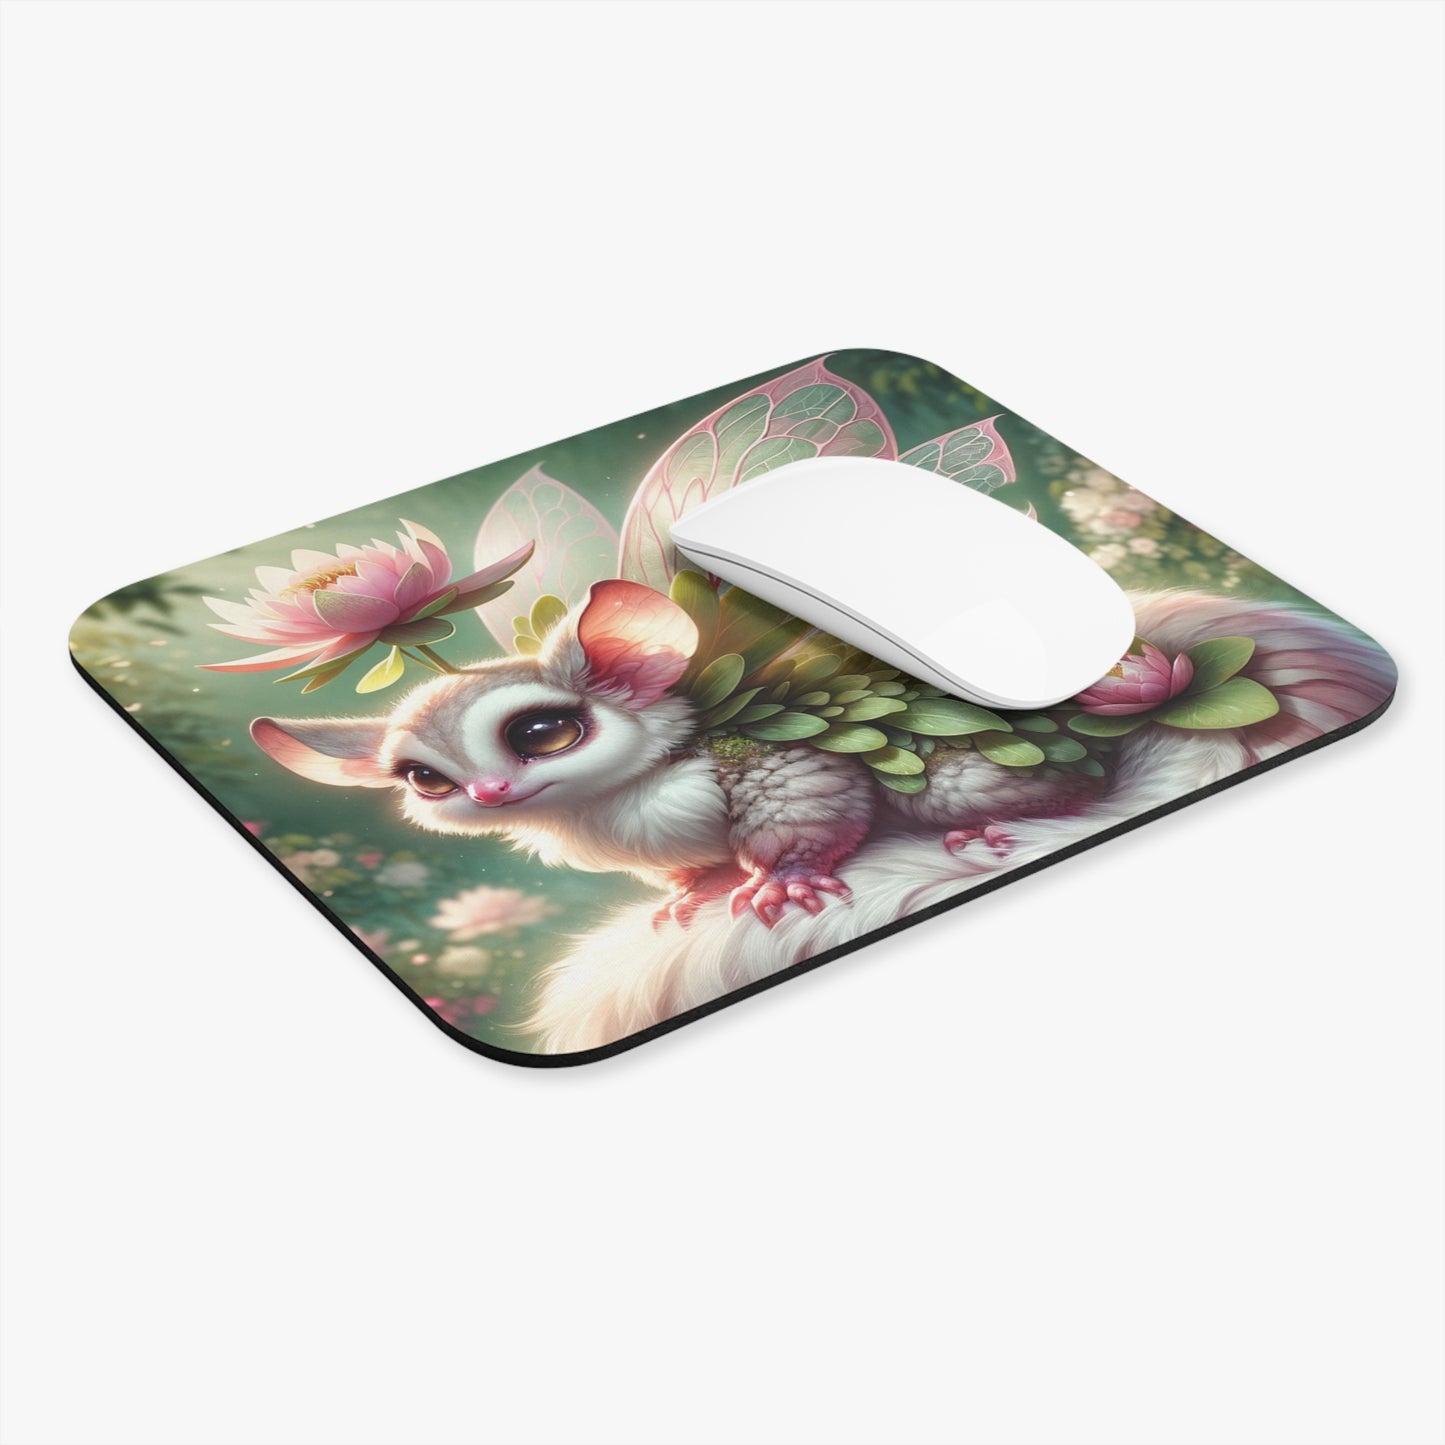 Mouse Pad - Lotus Whisperer: The Enchanted Blossom Sprite